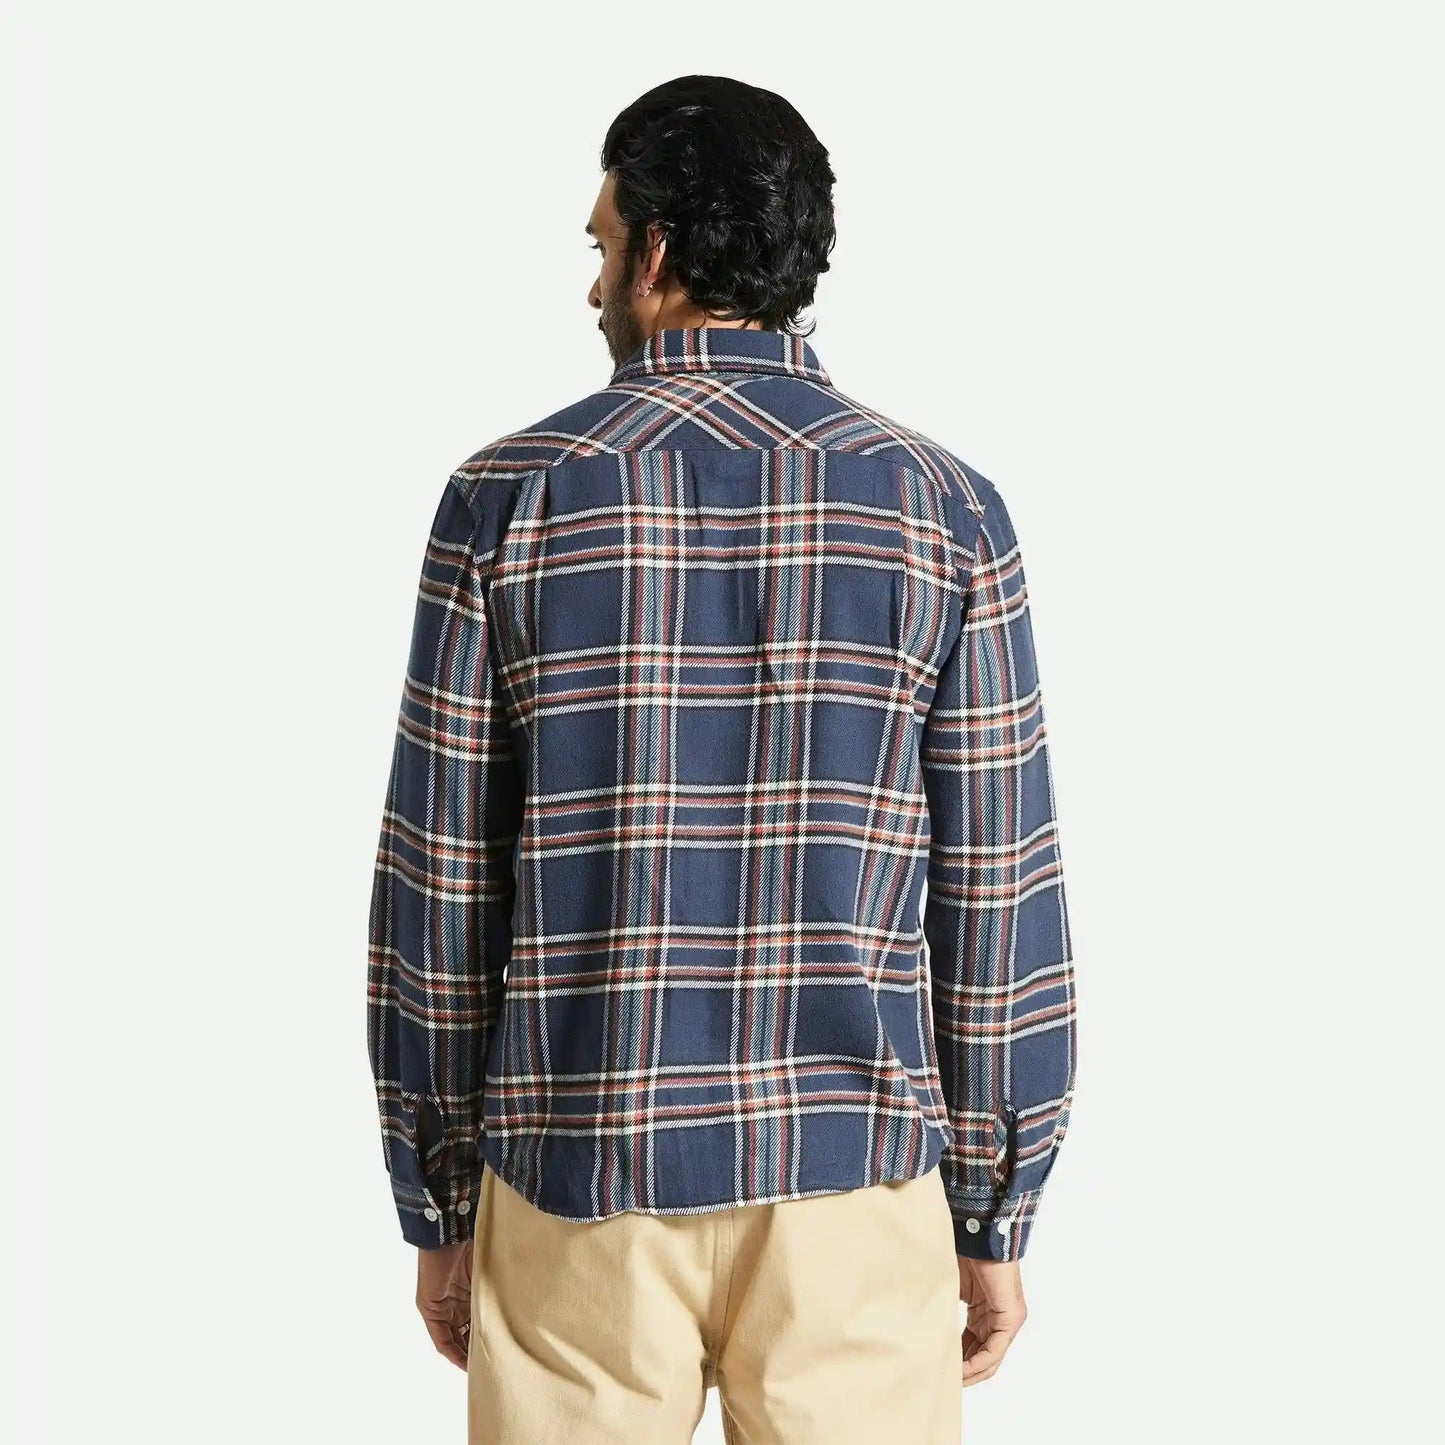 Brixton Bowery Flannel Shirt, washed navy/off white/terracot - Tiki Room Skateboards - 3